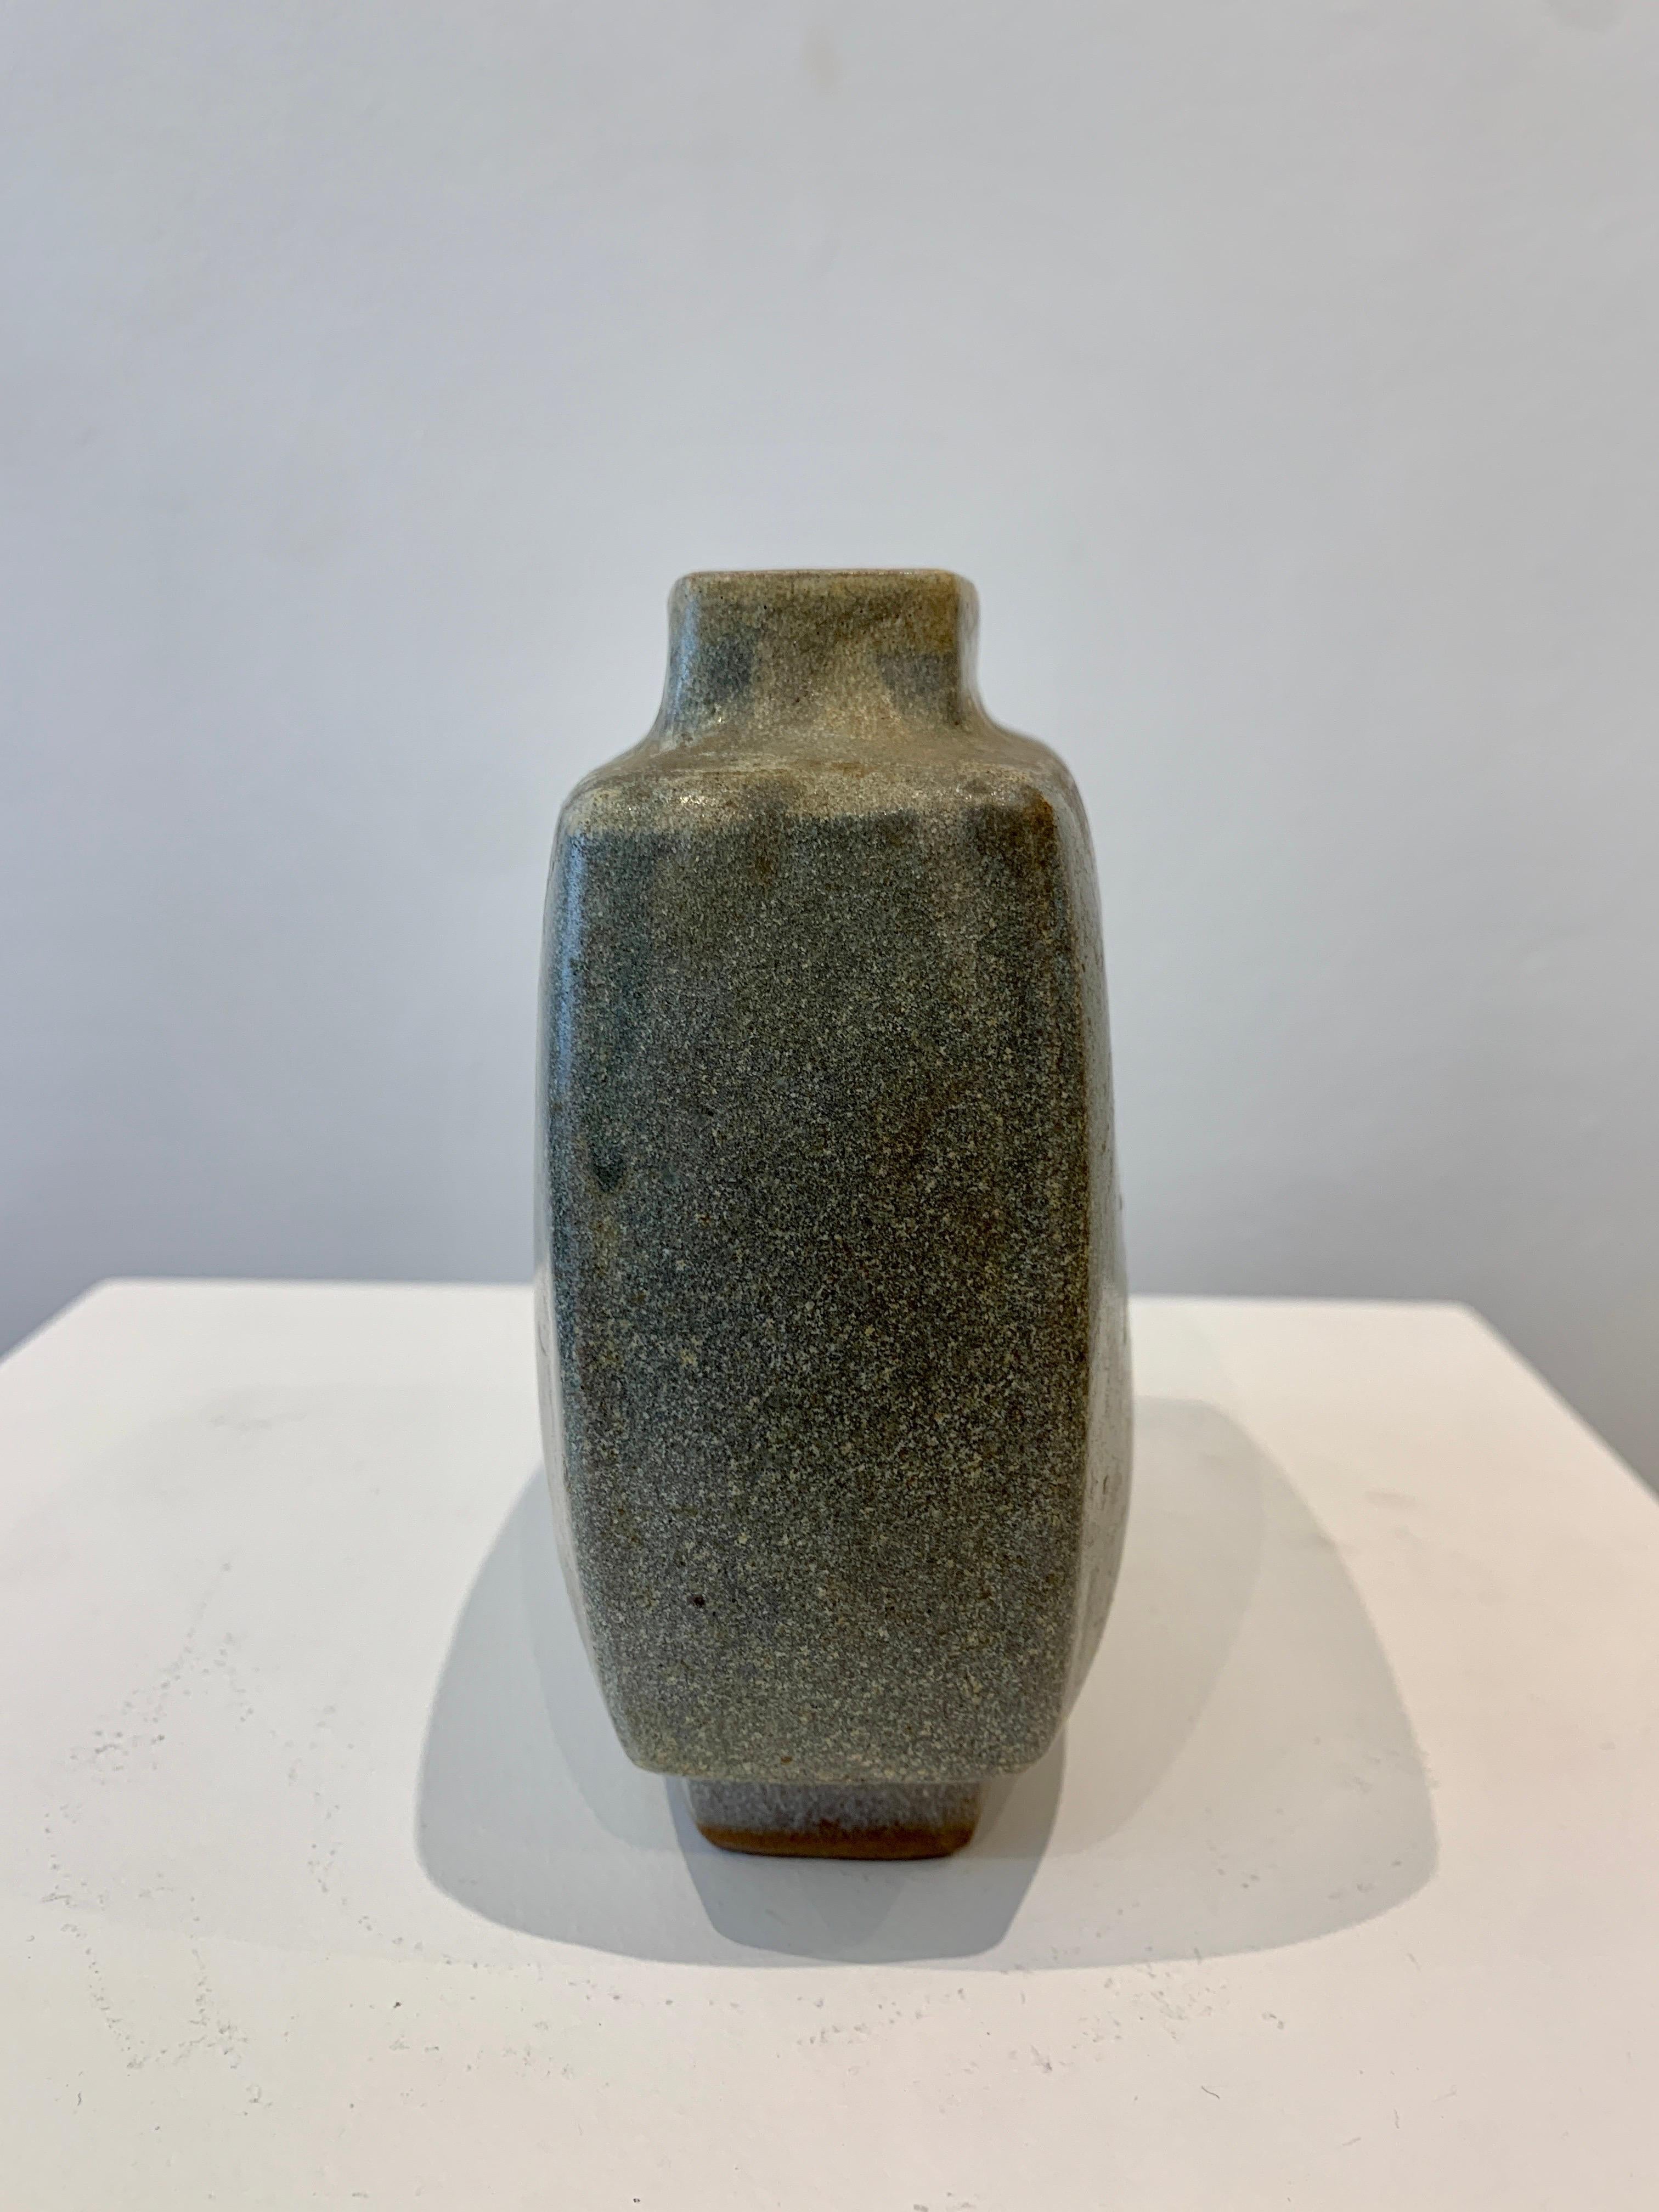 Pierre Culot is a Belgian Ceramist. The present ceramic is known as the Citroen Vase, referring to the shape of the vase. It is made of enamelled earthenware. The vase is stamped.